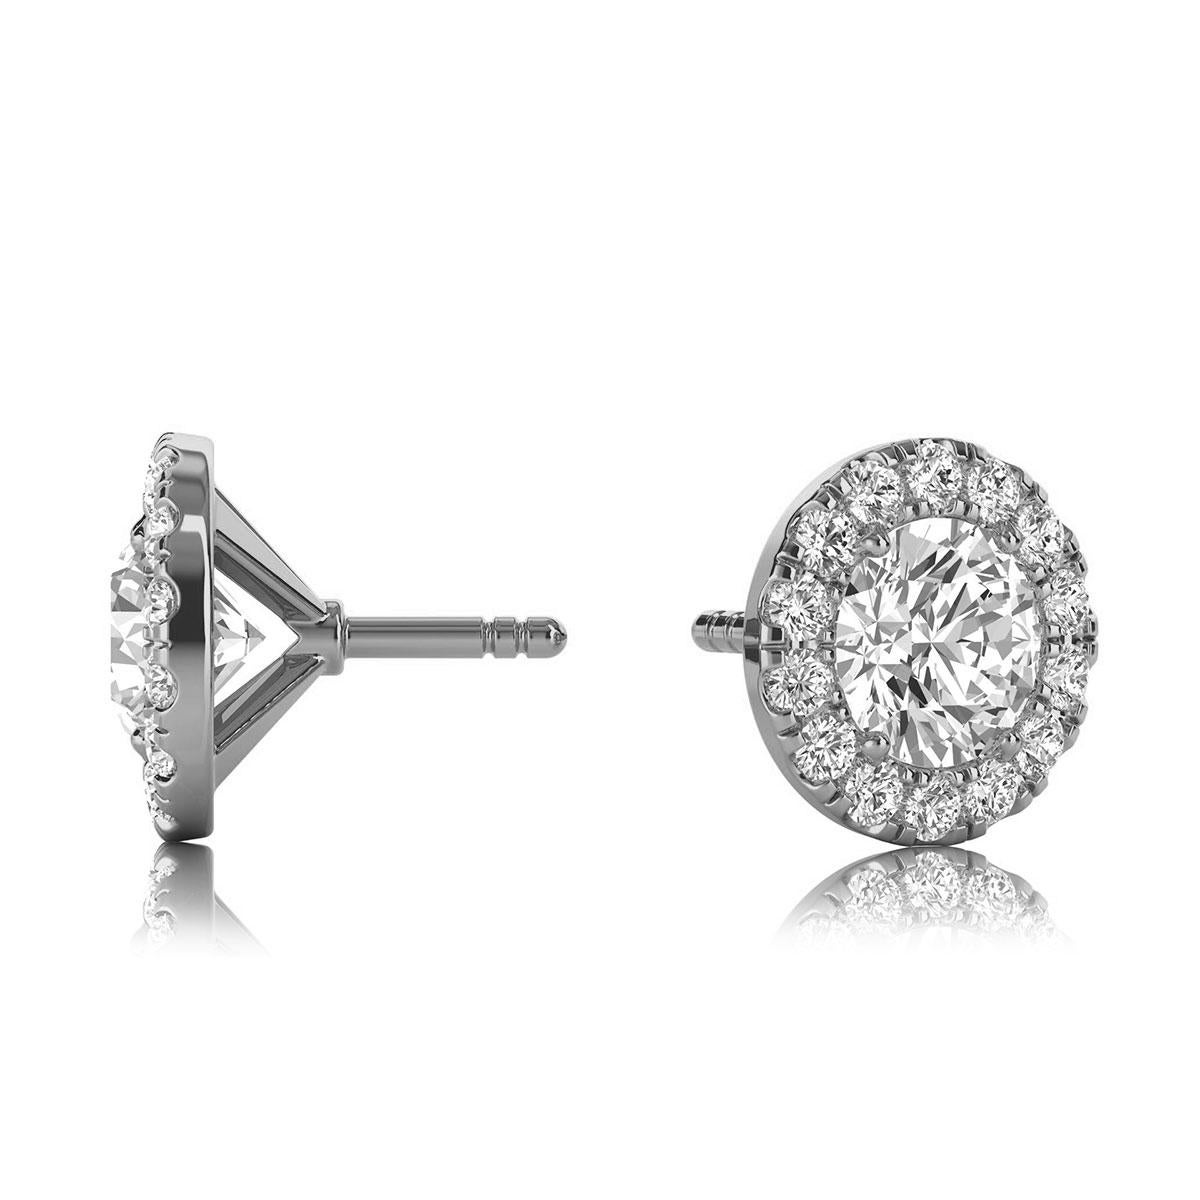 These delicate earrings feature two round shaped diamonds that are approximately 0.70-carat total weight (4.5mm) encircled by a halo of perfectly matched 28 round brilliant diamonds in about 0.28-carat total weight. The earrings are measuring at